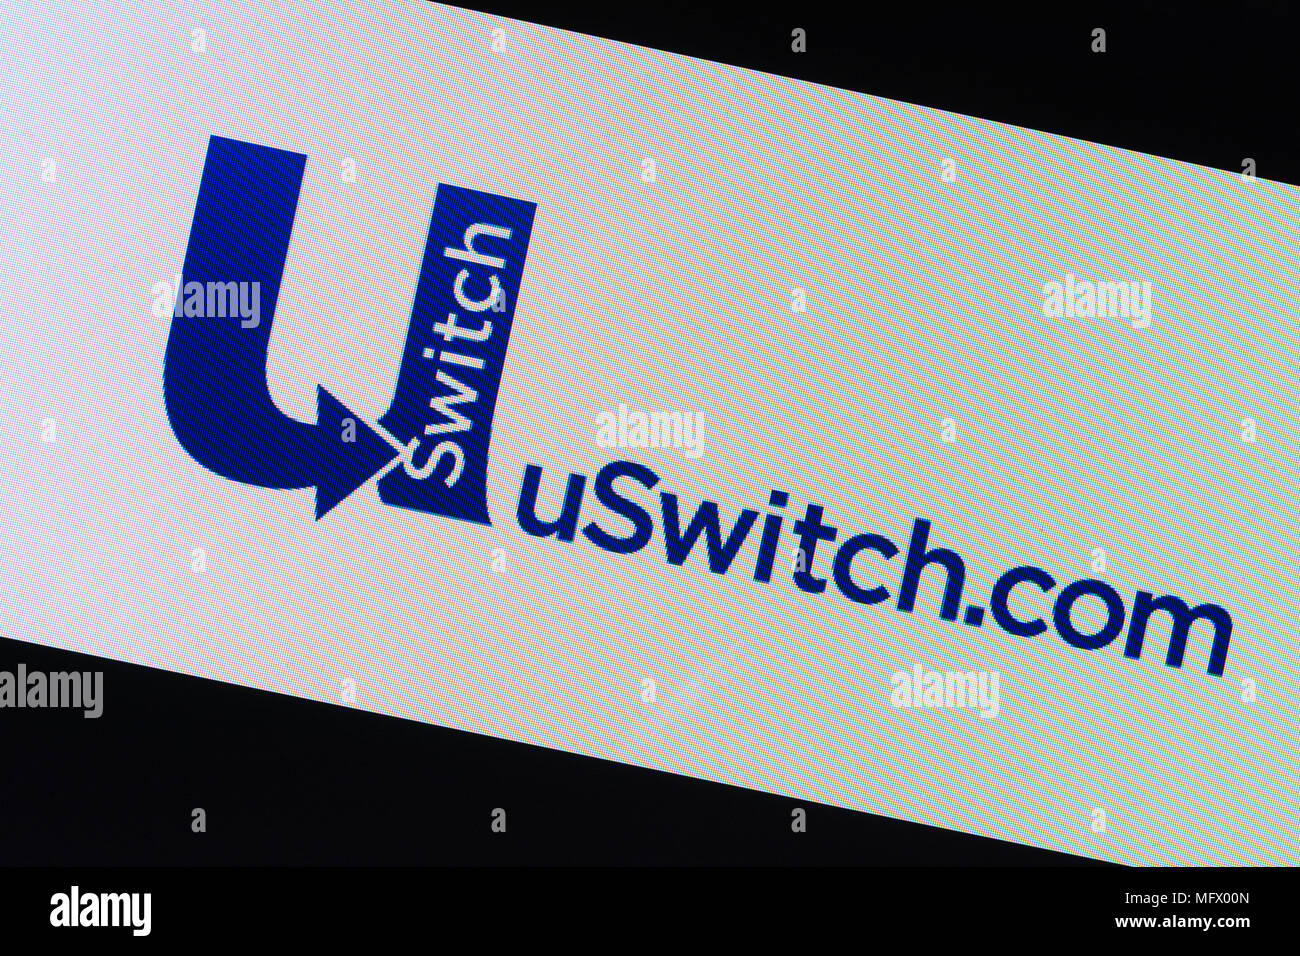 U Switch logo - website for comparing energy prices and other utilities Stock Photo